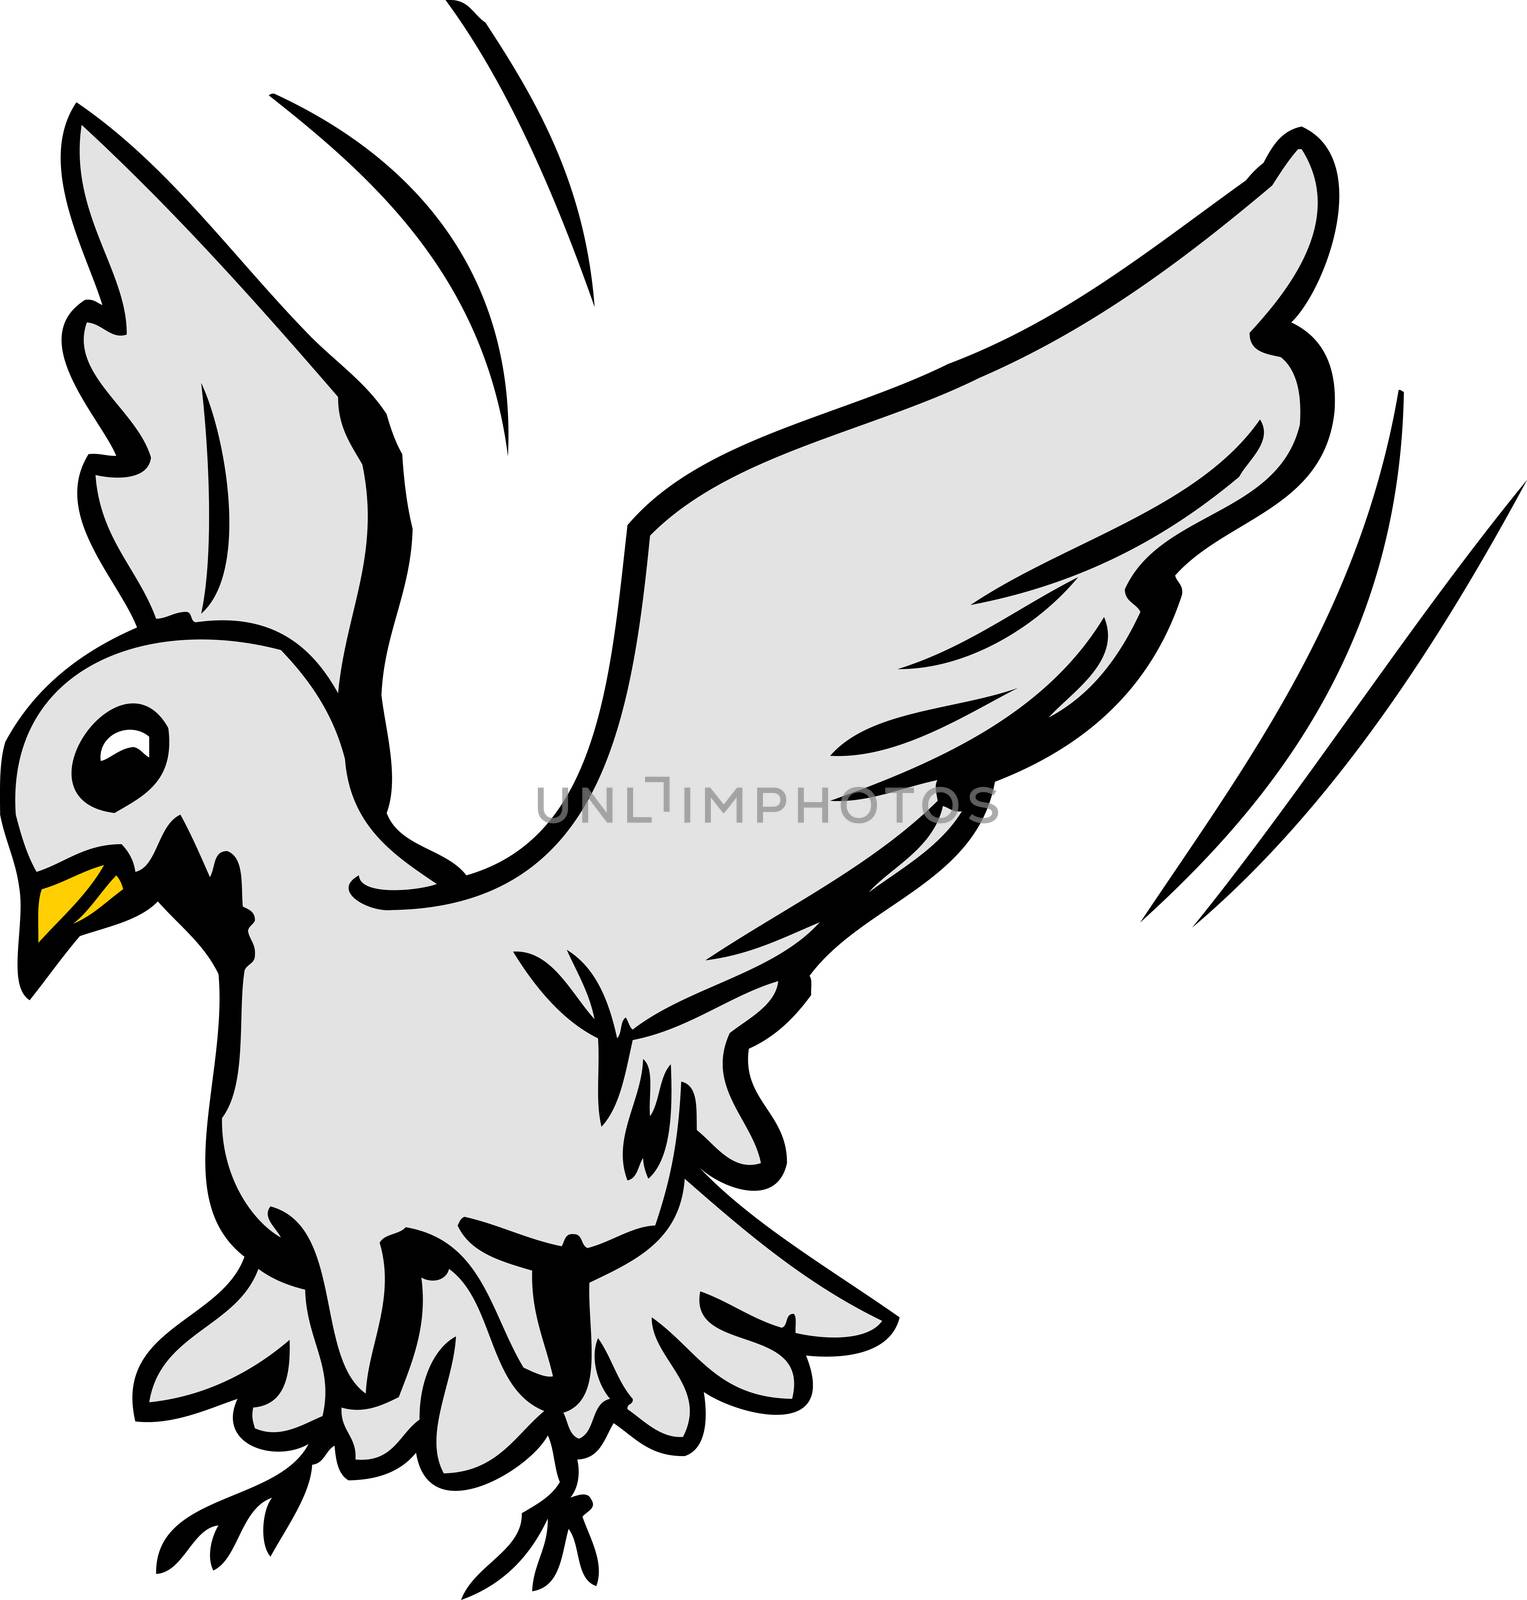 Single cute cartoon dove flapping wings as it lands over white background